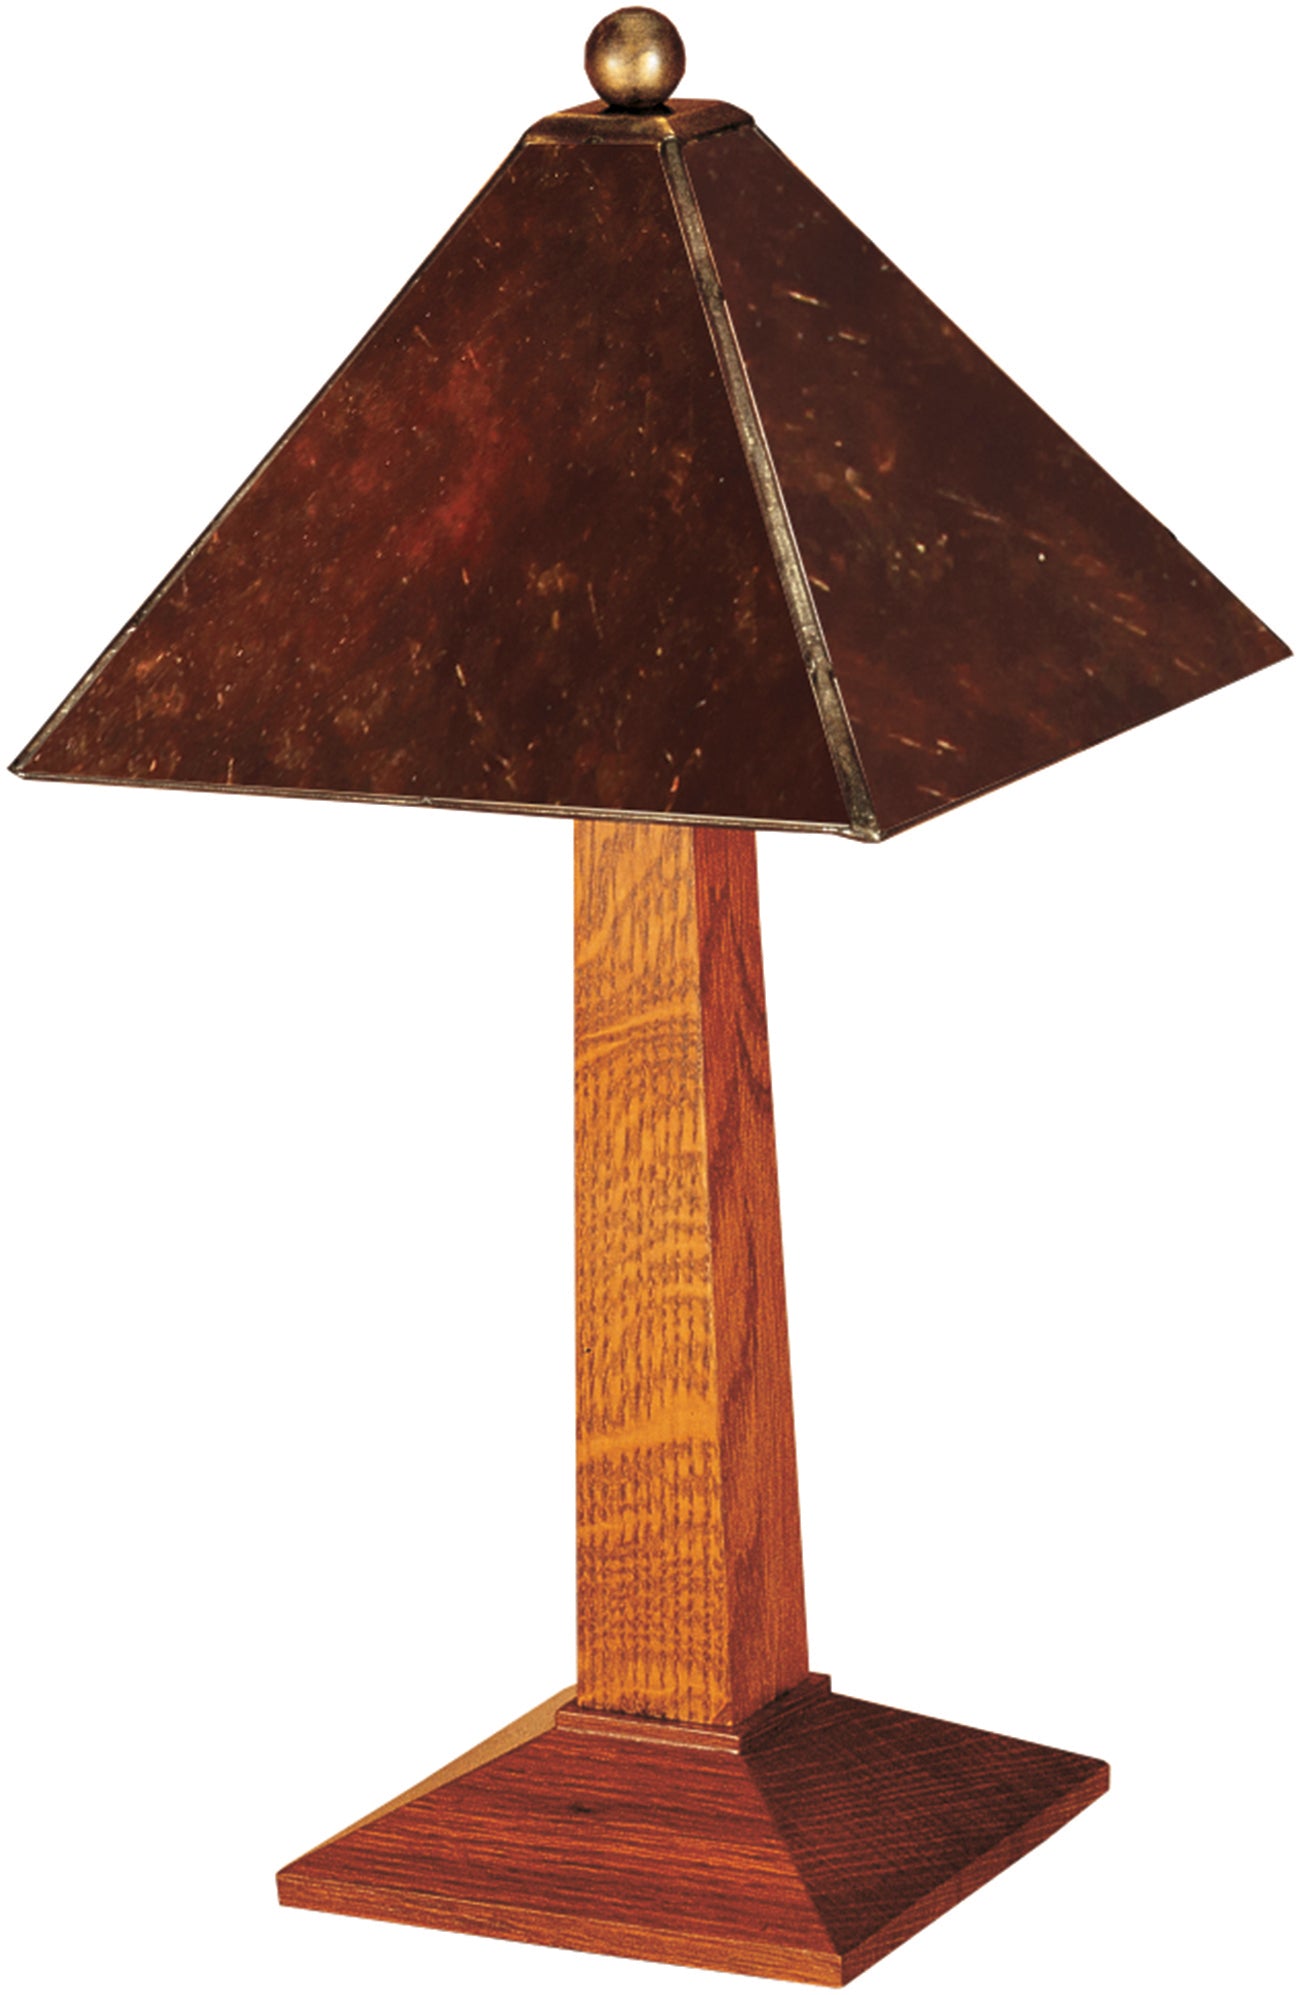 Small Lamp with Mica Shade - Stickley Brand